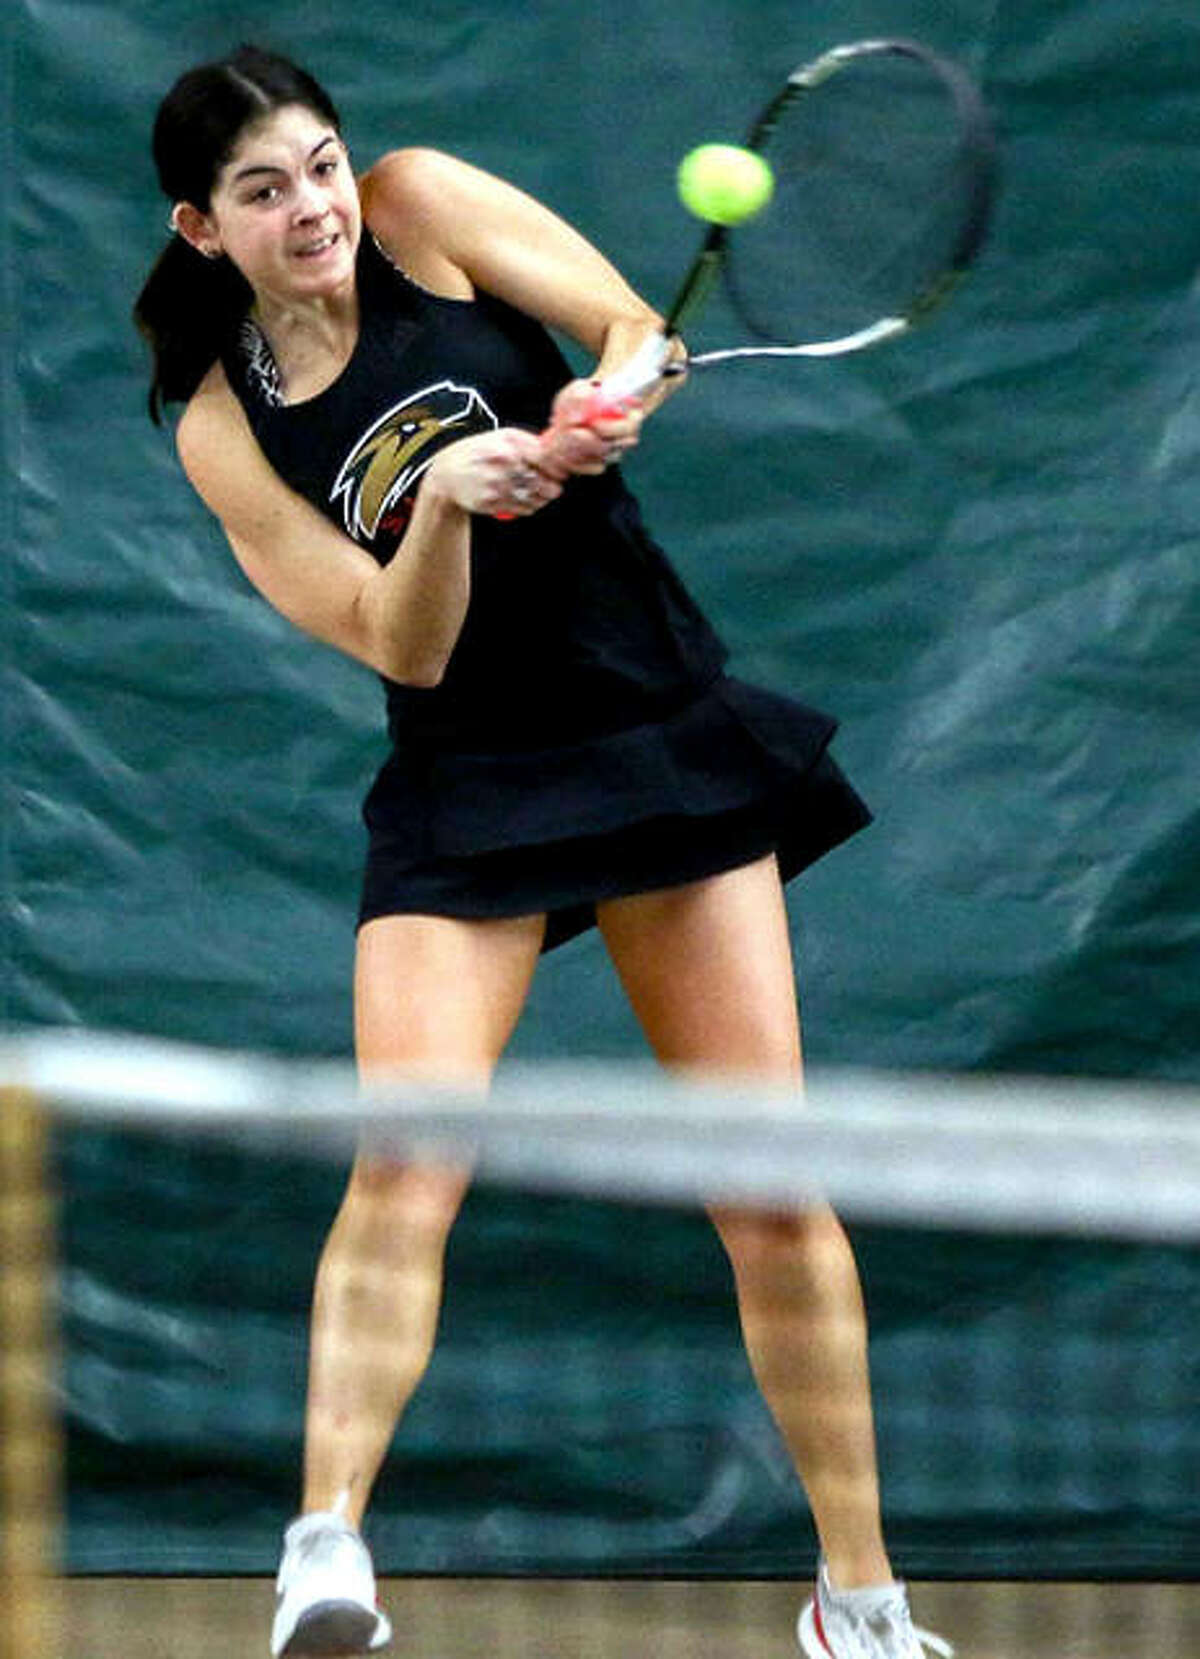 SIUE’s Lara Tupper earned the 2020 Intercollegiate Tennis Association Central Region Cissie Leary Sportsmanship Award. The announcement was made Tuesday.